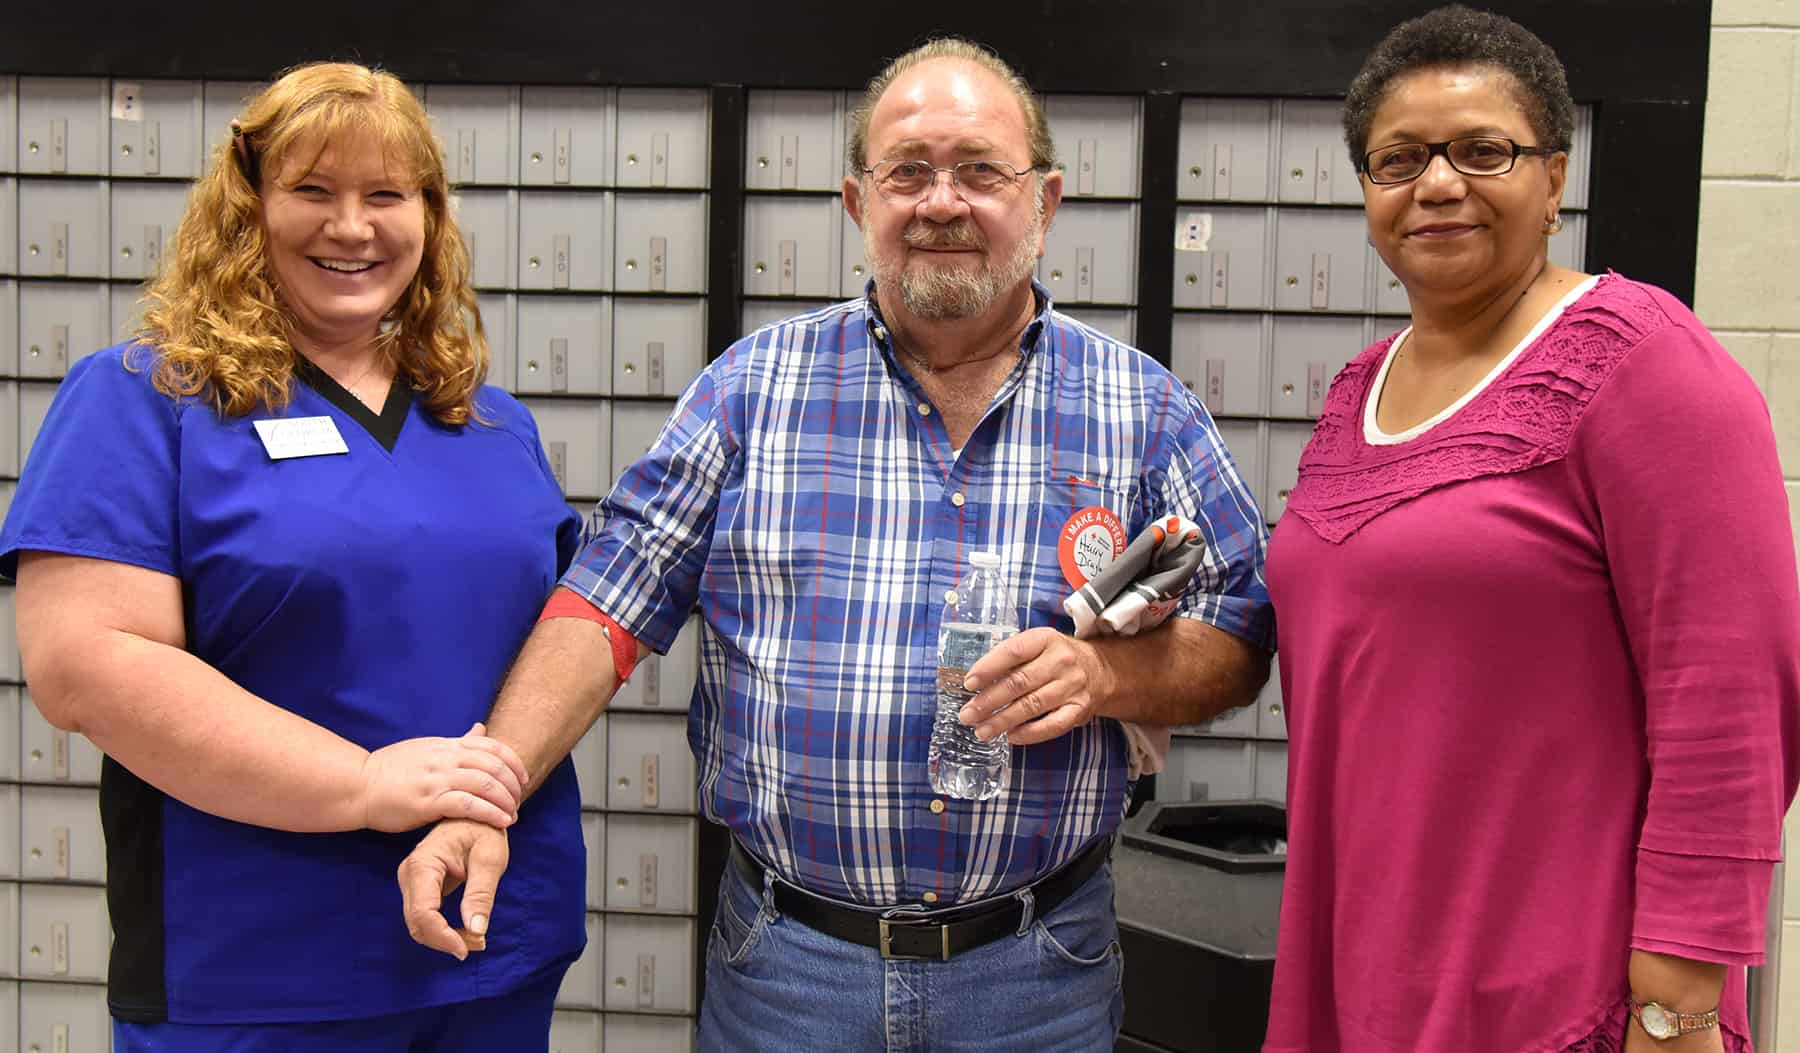 South Georgia Technical College Licensed Practical Nursing Instructor Jennifer Childs is shown above with SGTC retiree Harry Dragon and SGTC’s Linda Edge at the Red Cross Blood Drive held at South Georgia Tech recently.